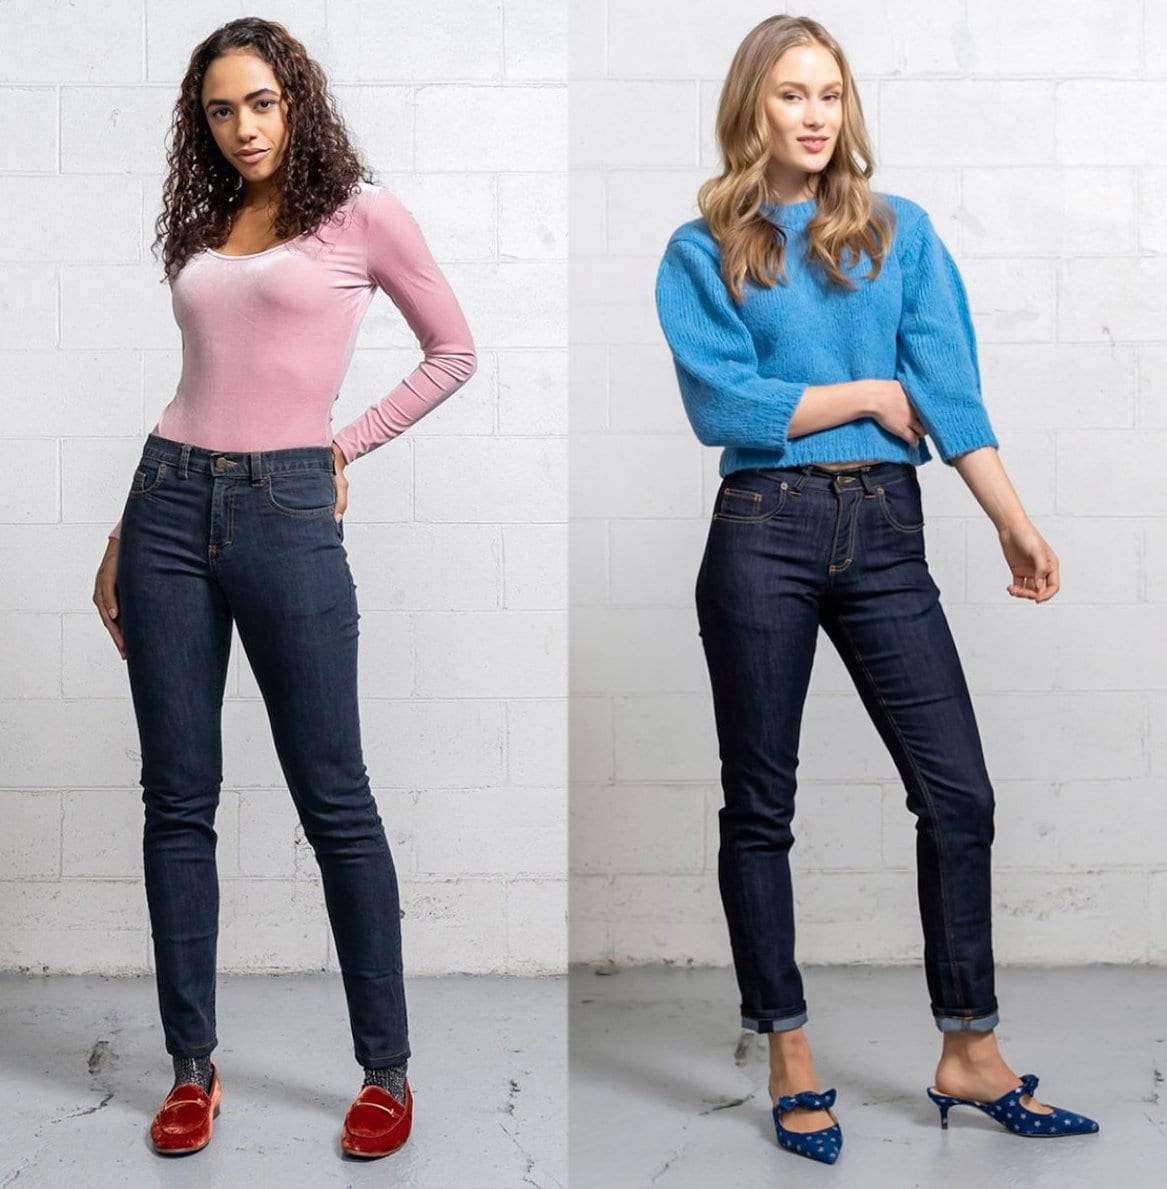 Dearborn Denim's bestseller jeans for women include the Skinny High Rise, $65 - $69 and the Straight Leg, $65 - $67